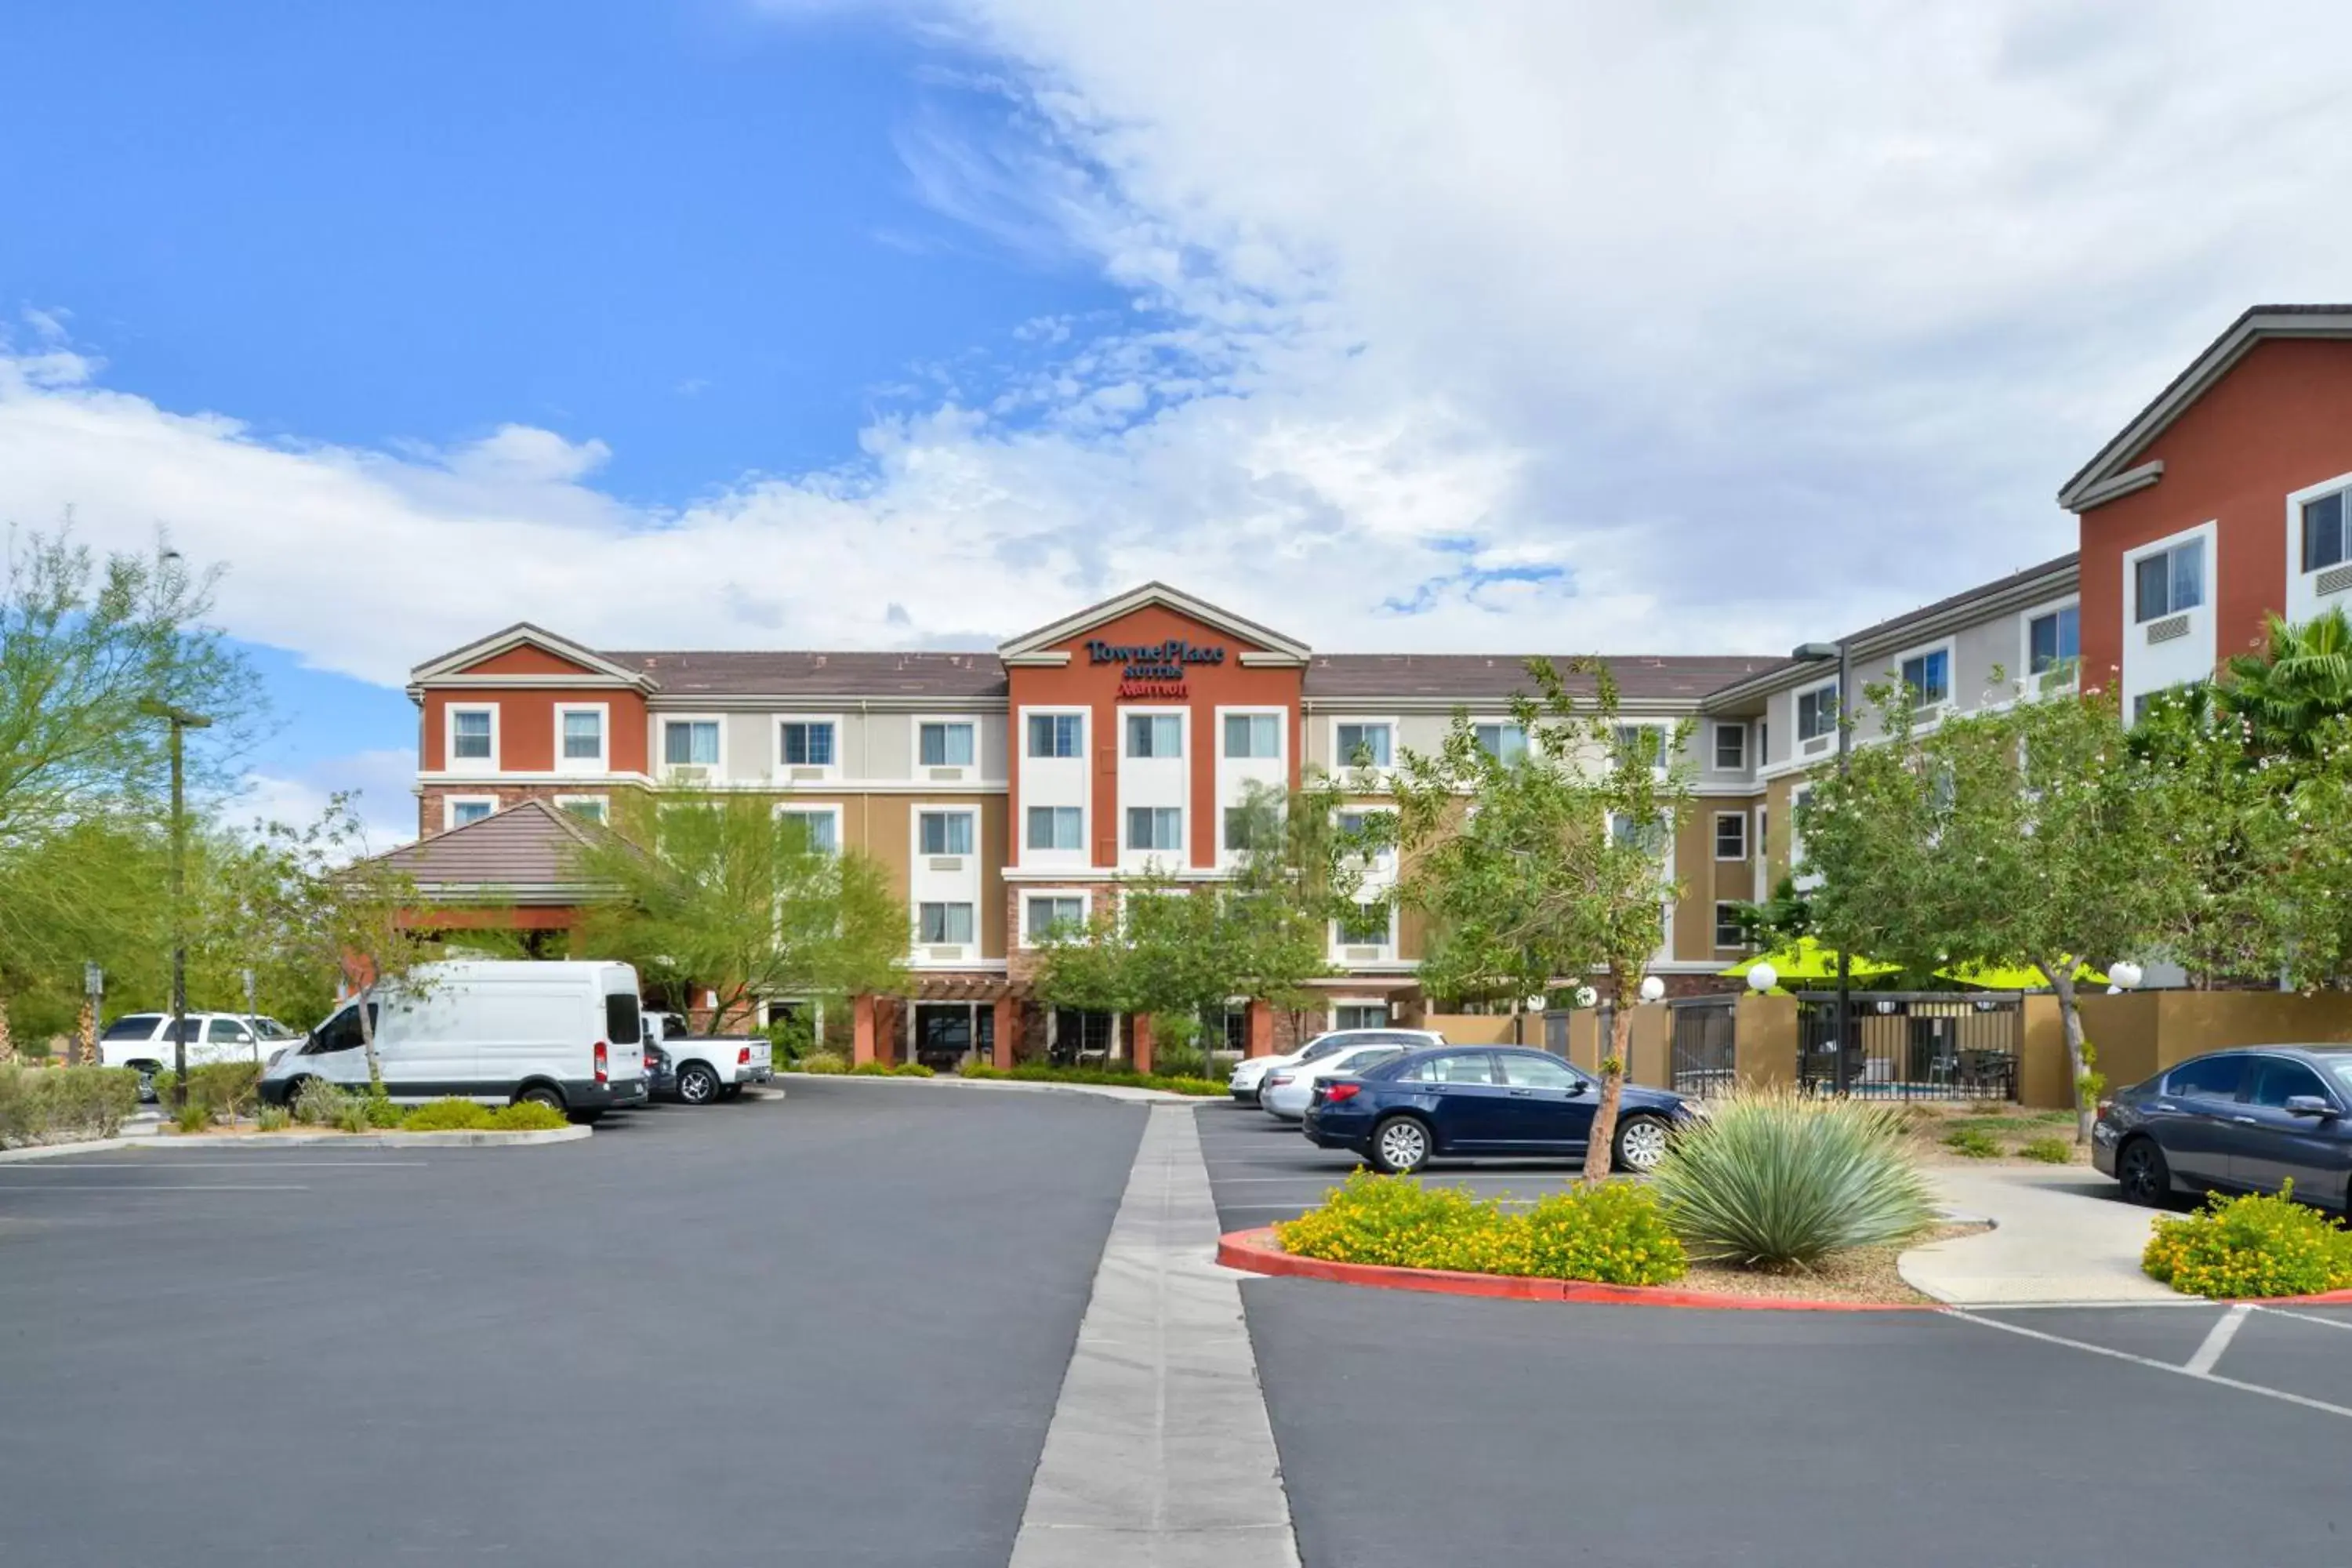 Property Building in TownePlace Suites by Marriott Las Vegas Henderson